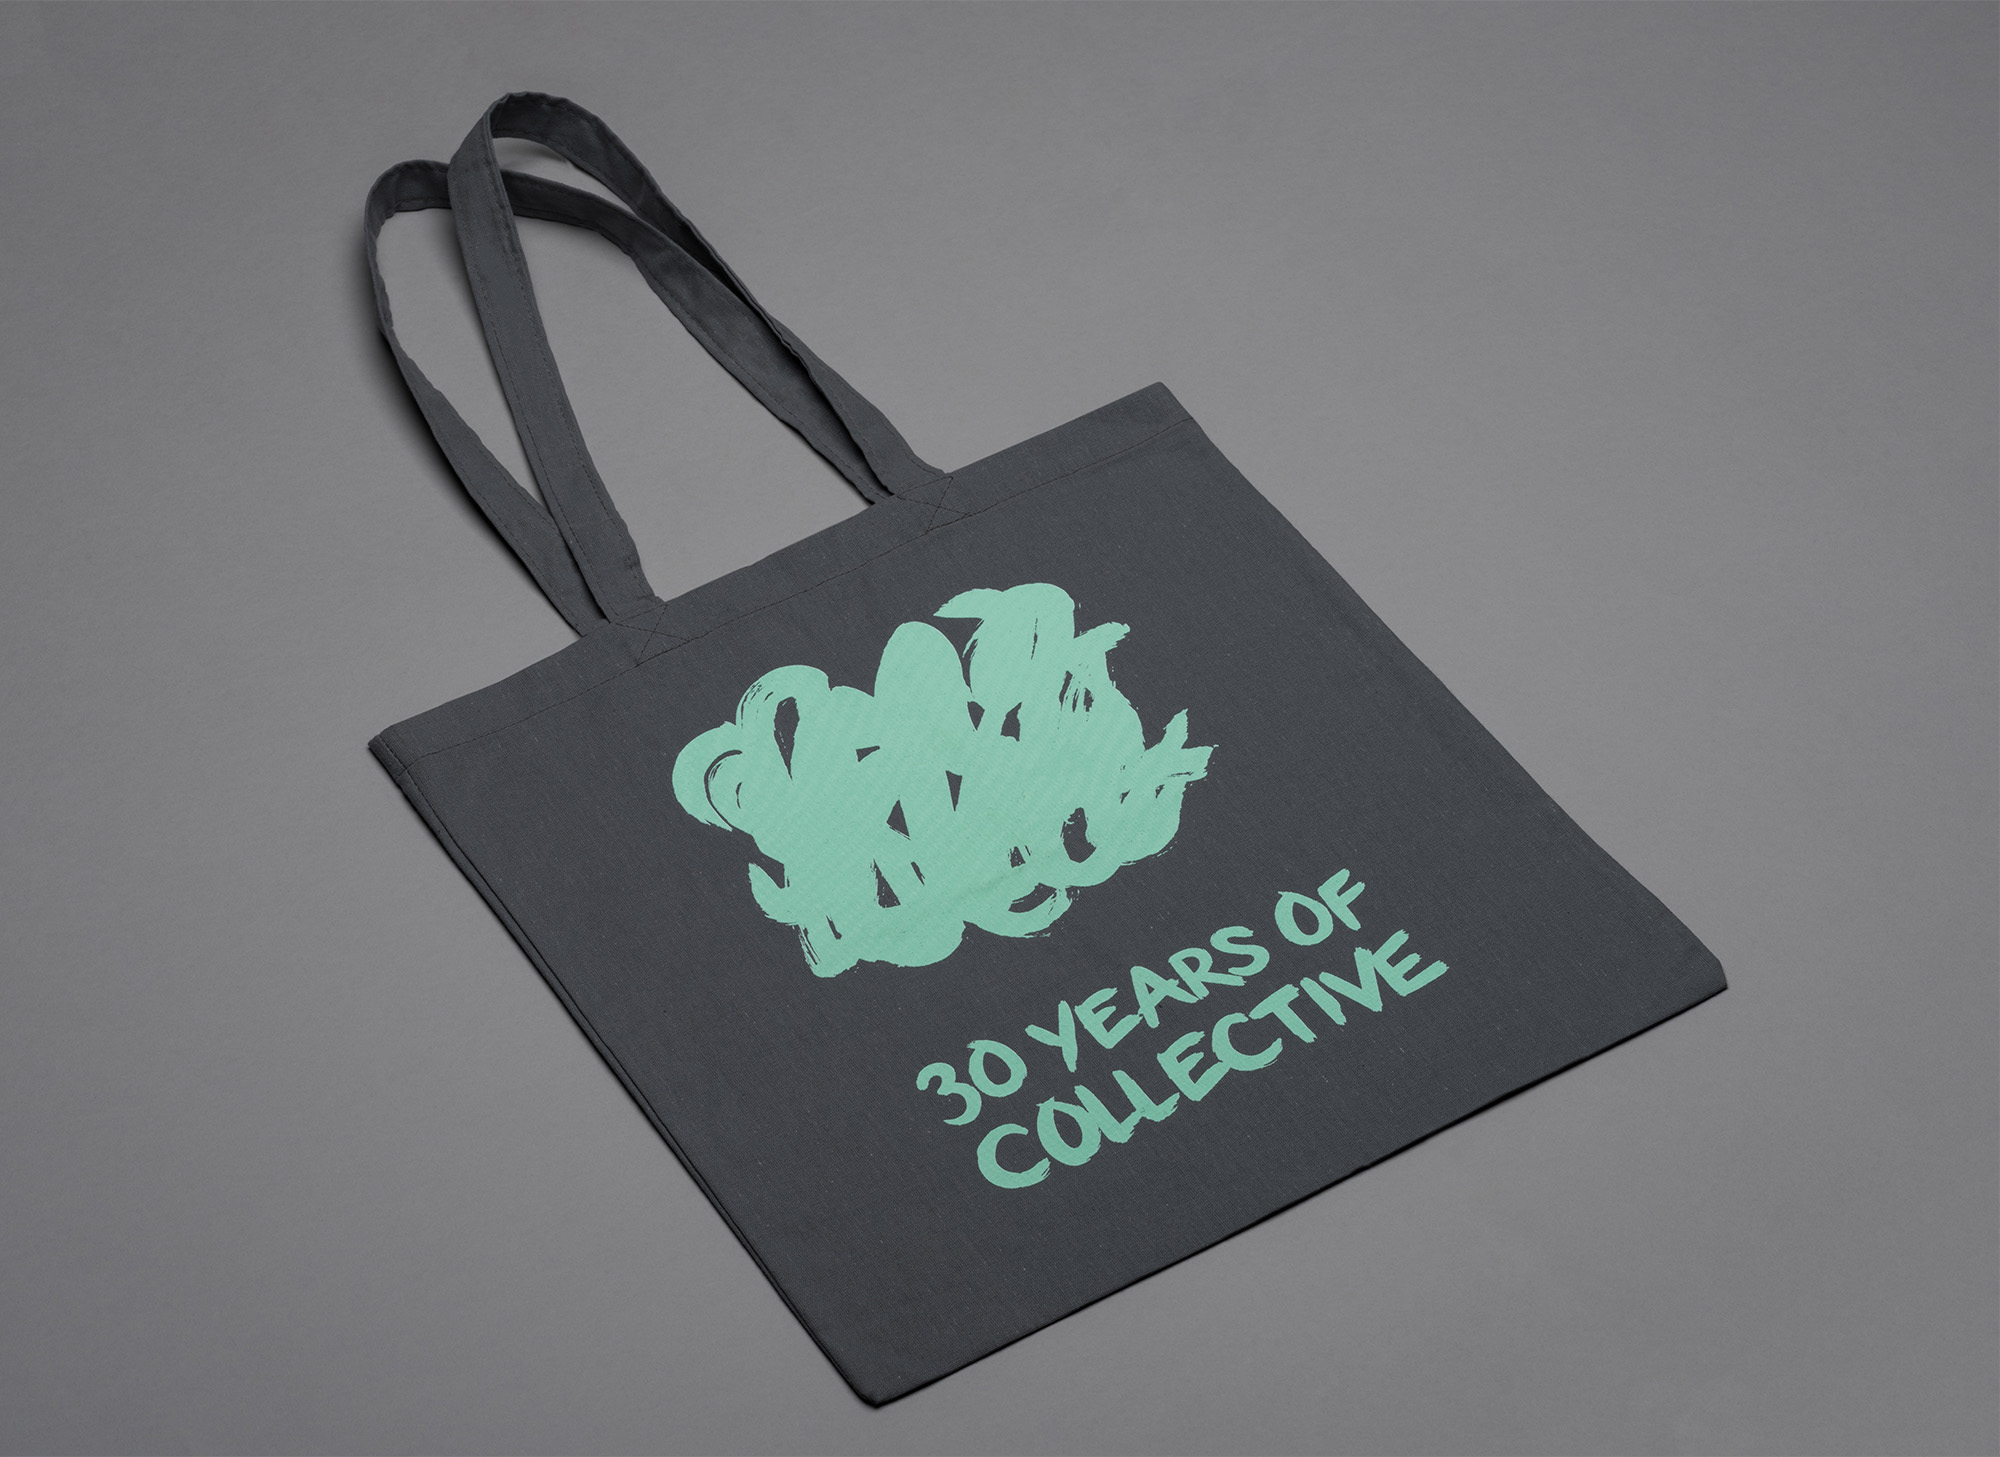 Green '30 years of Collective' screenprinted on a tote bag